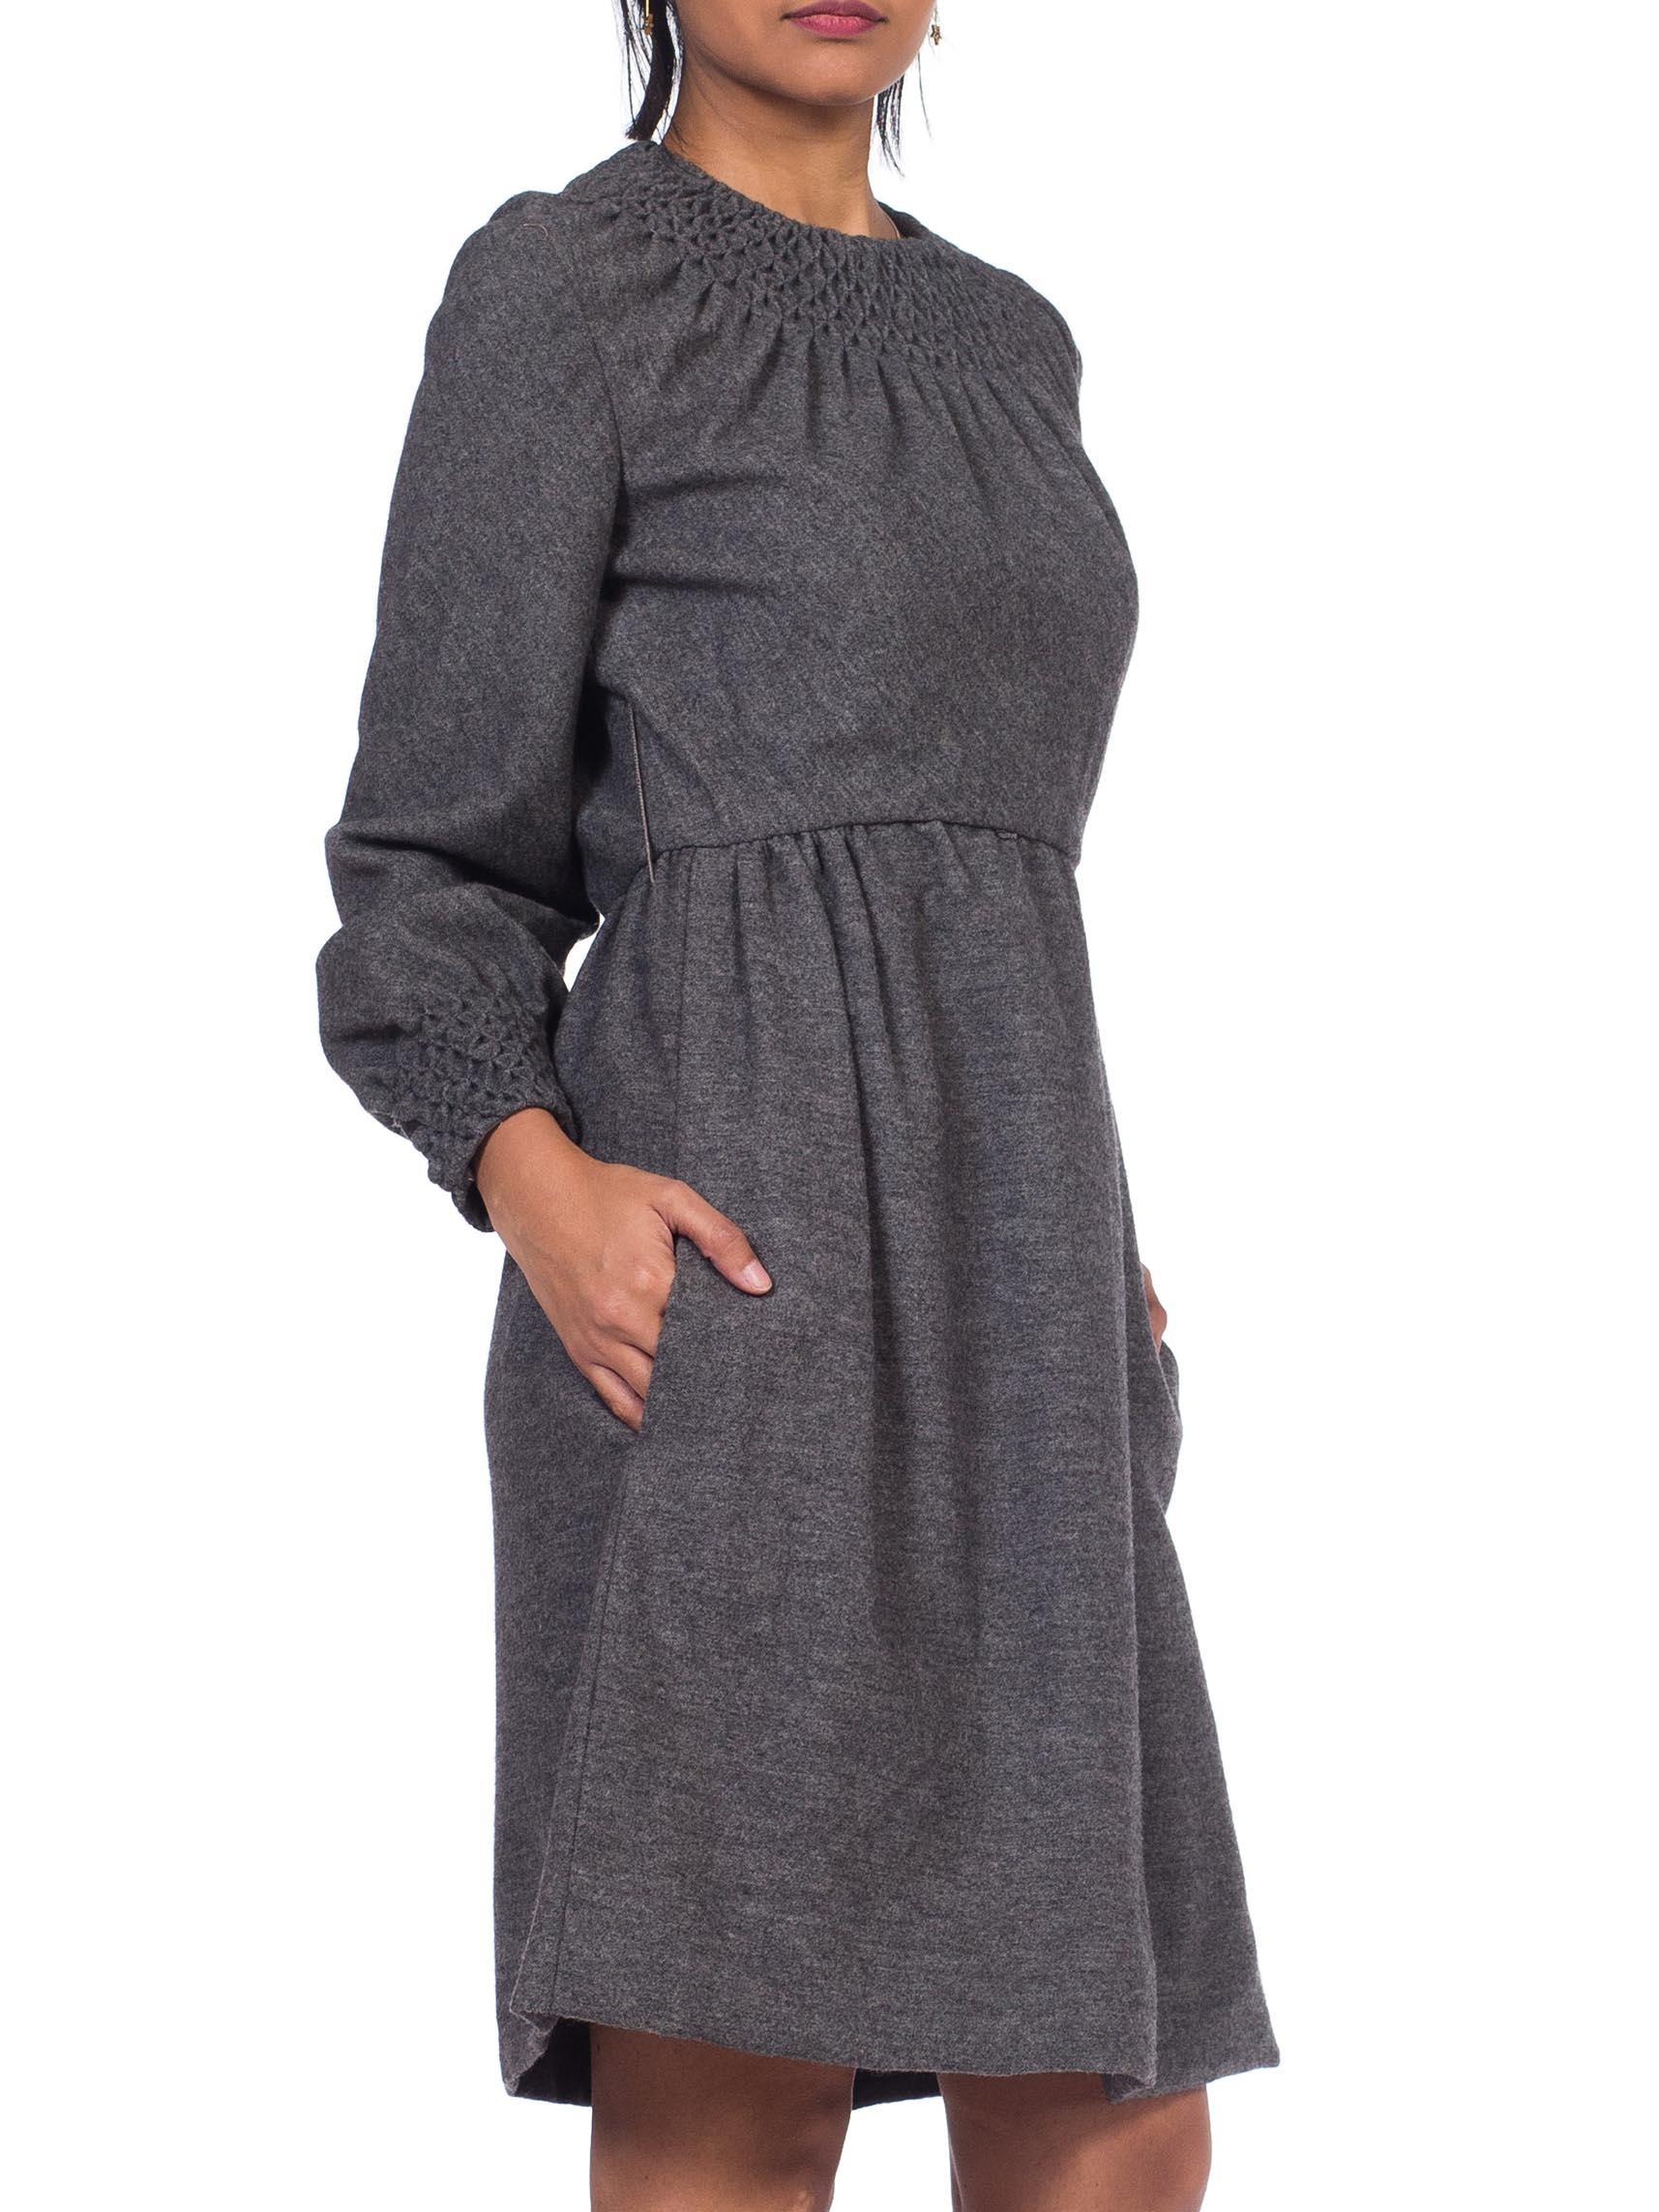 1960S CHESTER WEINBERG Style Grey Wool Dress Lined In Silk With Pockets For Sale 1